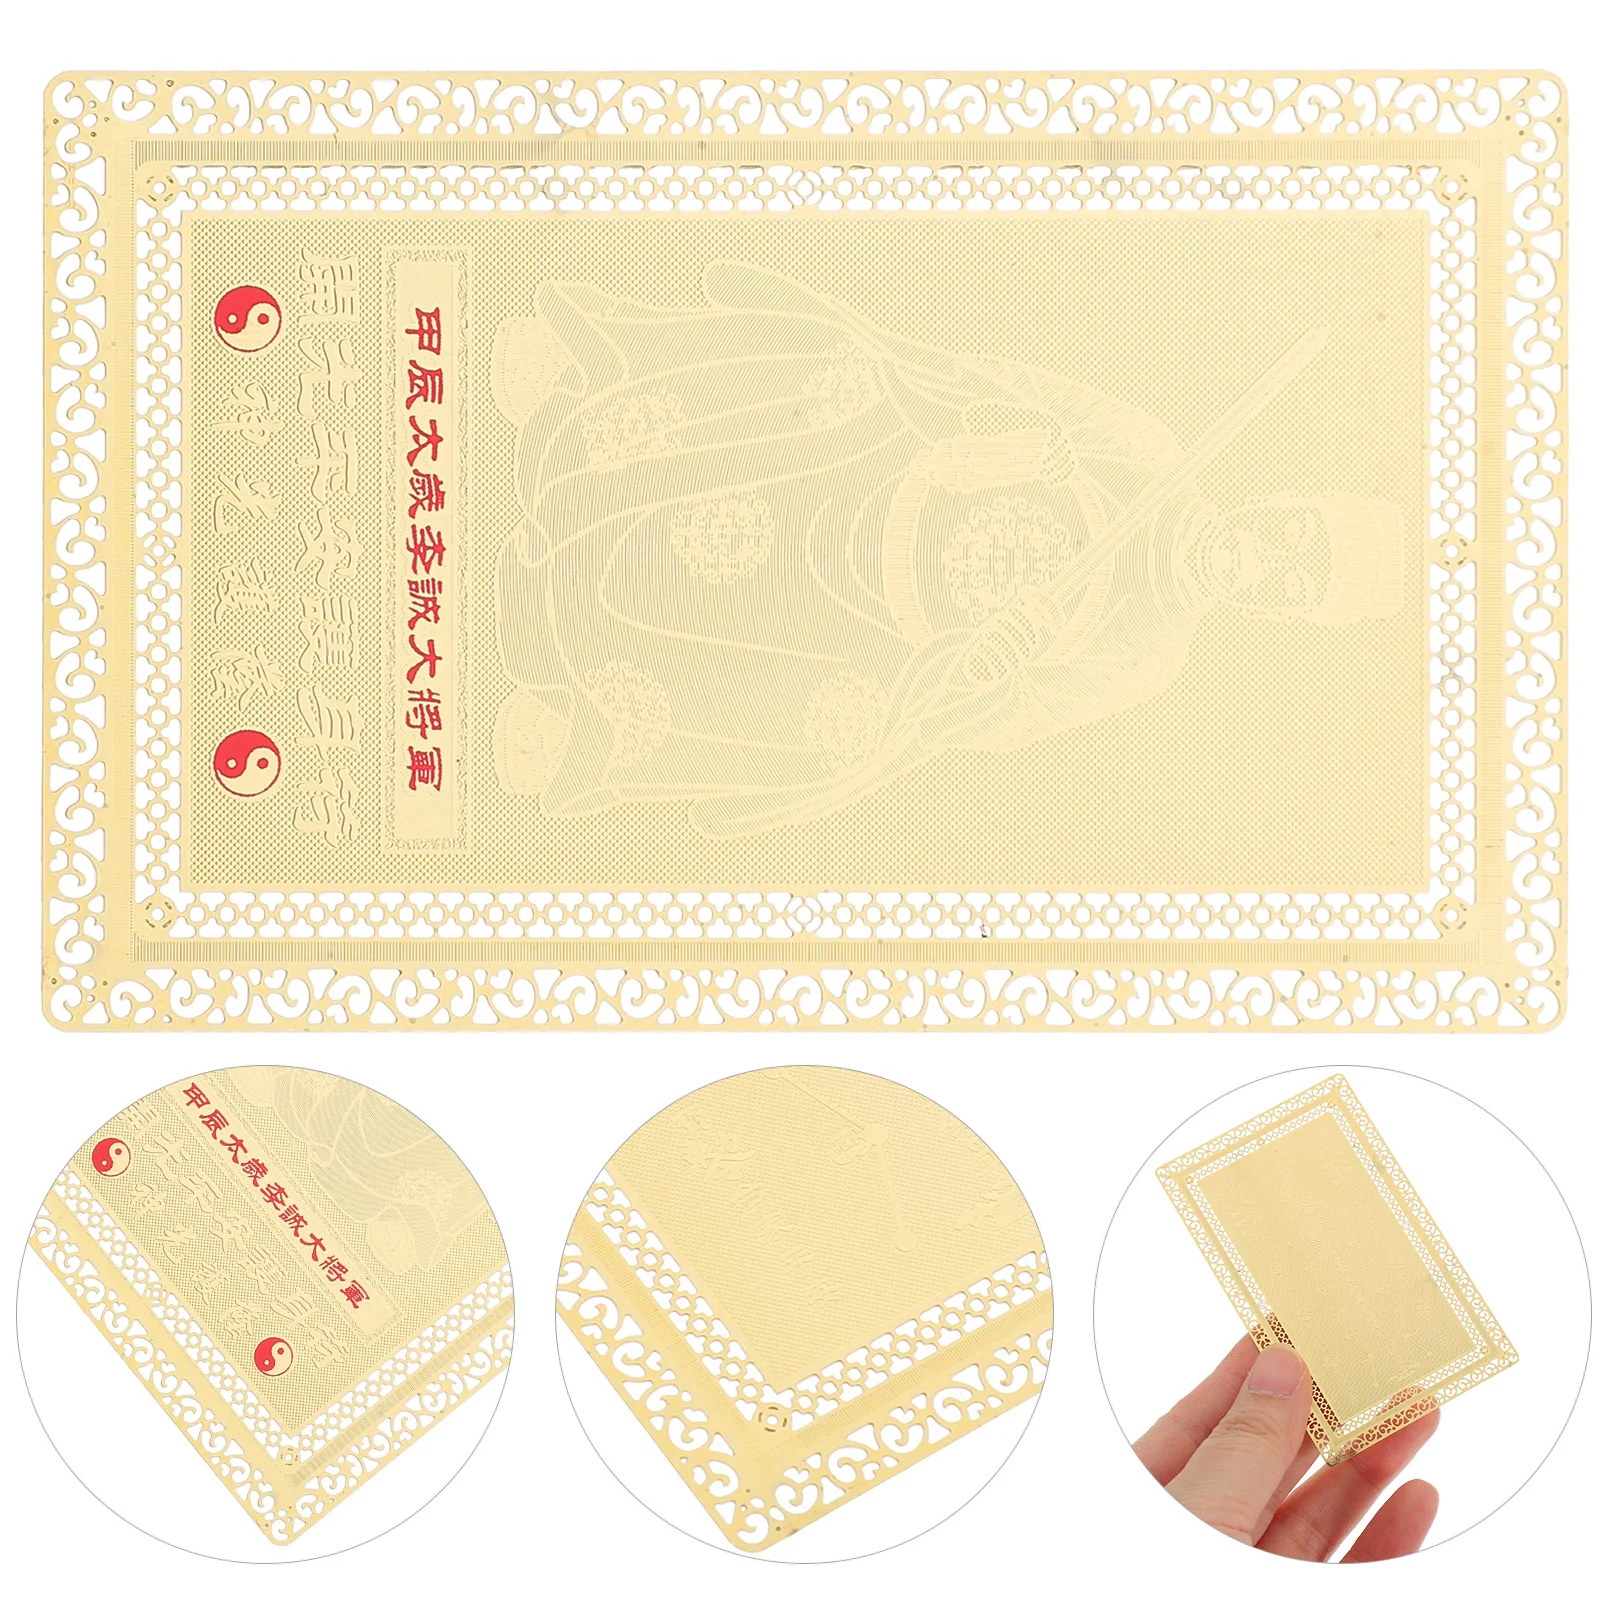 

Tai Sui Card Amulet Small Blessing Delicate Year Birth Chinese Protection Luck Taisui Cards